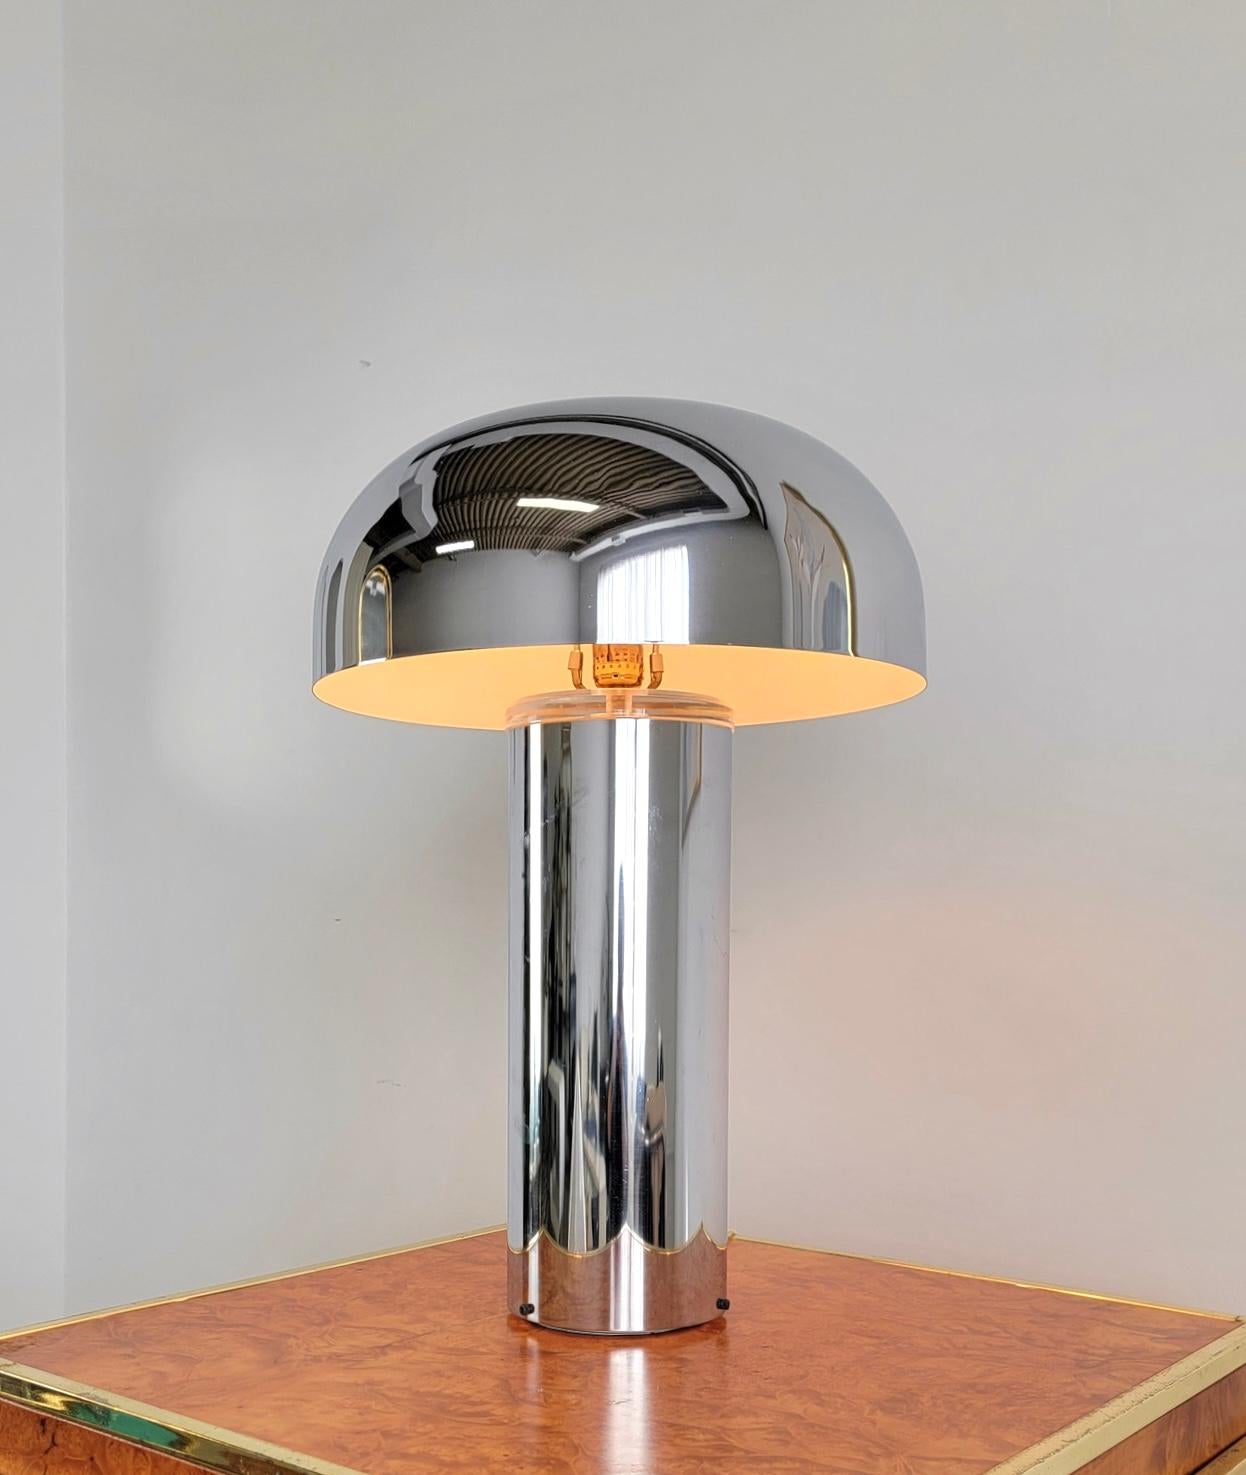 Stunning chrome table lamp from the 1970s. It features a chrome body and shade with a lucite accent on the lid of the body. The shade is in the shape of a dome. It resembles the style of Laurel mushroom lamps as well as      Franco Mirenzi lamps. In